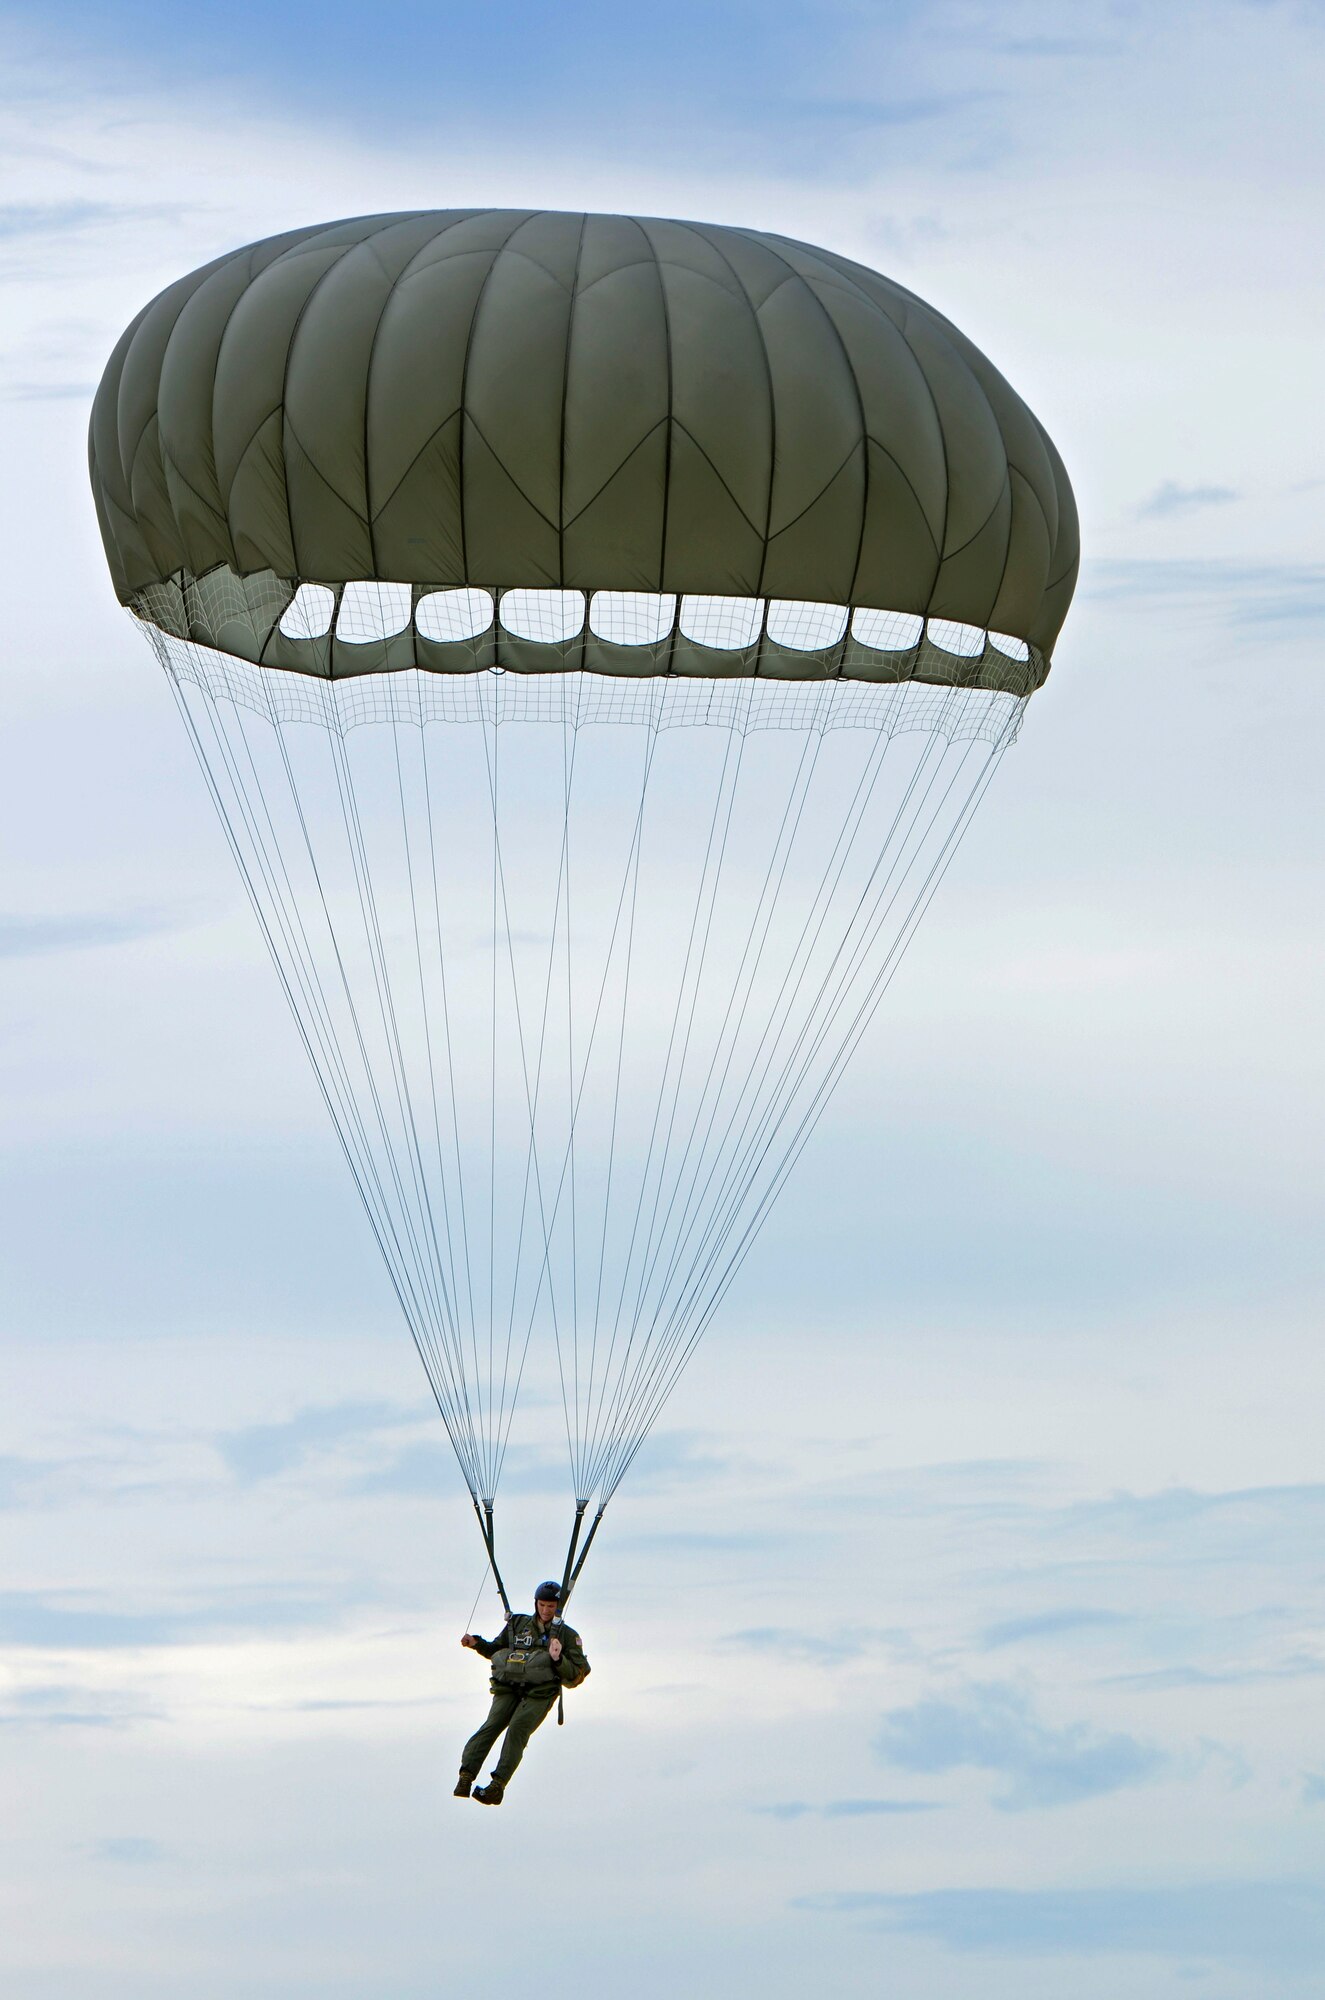 Staff Sgt. Daniel Guy, 736th Security Forces Squadron fire team leader, makes his way to the ground Aug. 21 after jumping from a C-130 Hercules over Andersen Air Force Base, Guam. Air Force static line capability falls under the personnel parachute program. Jumpers are first qualified during a three-week long basic airborne course at Ft. Benning, Ga., and then continue to work on their jumping proficiency and qualifications after they return here.